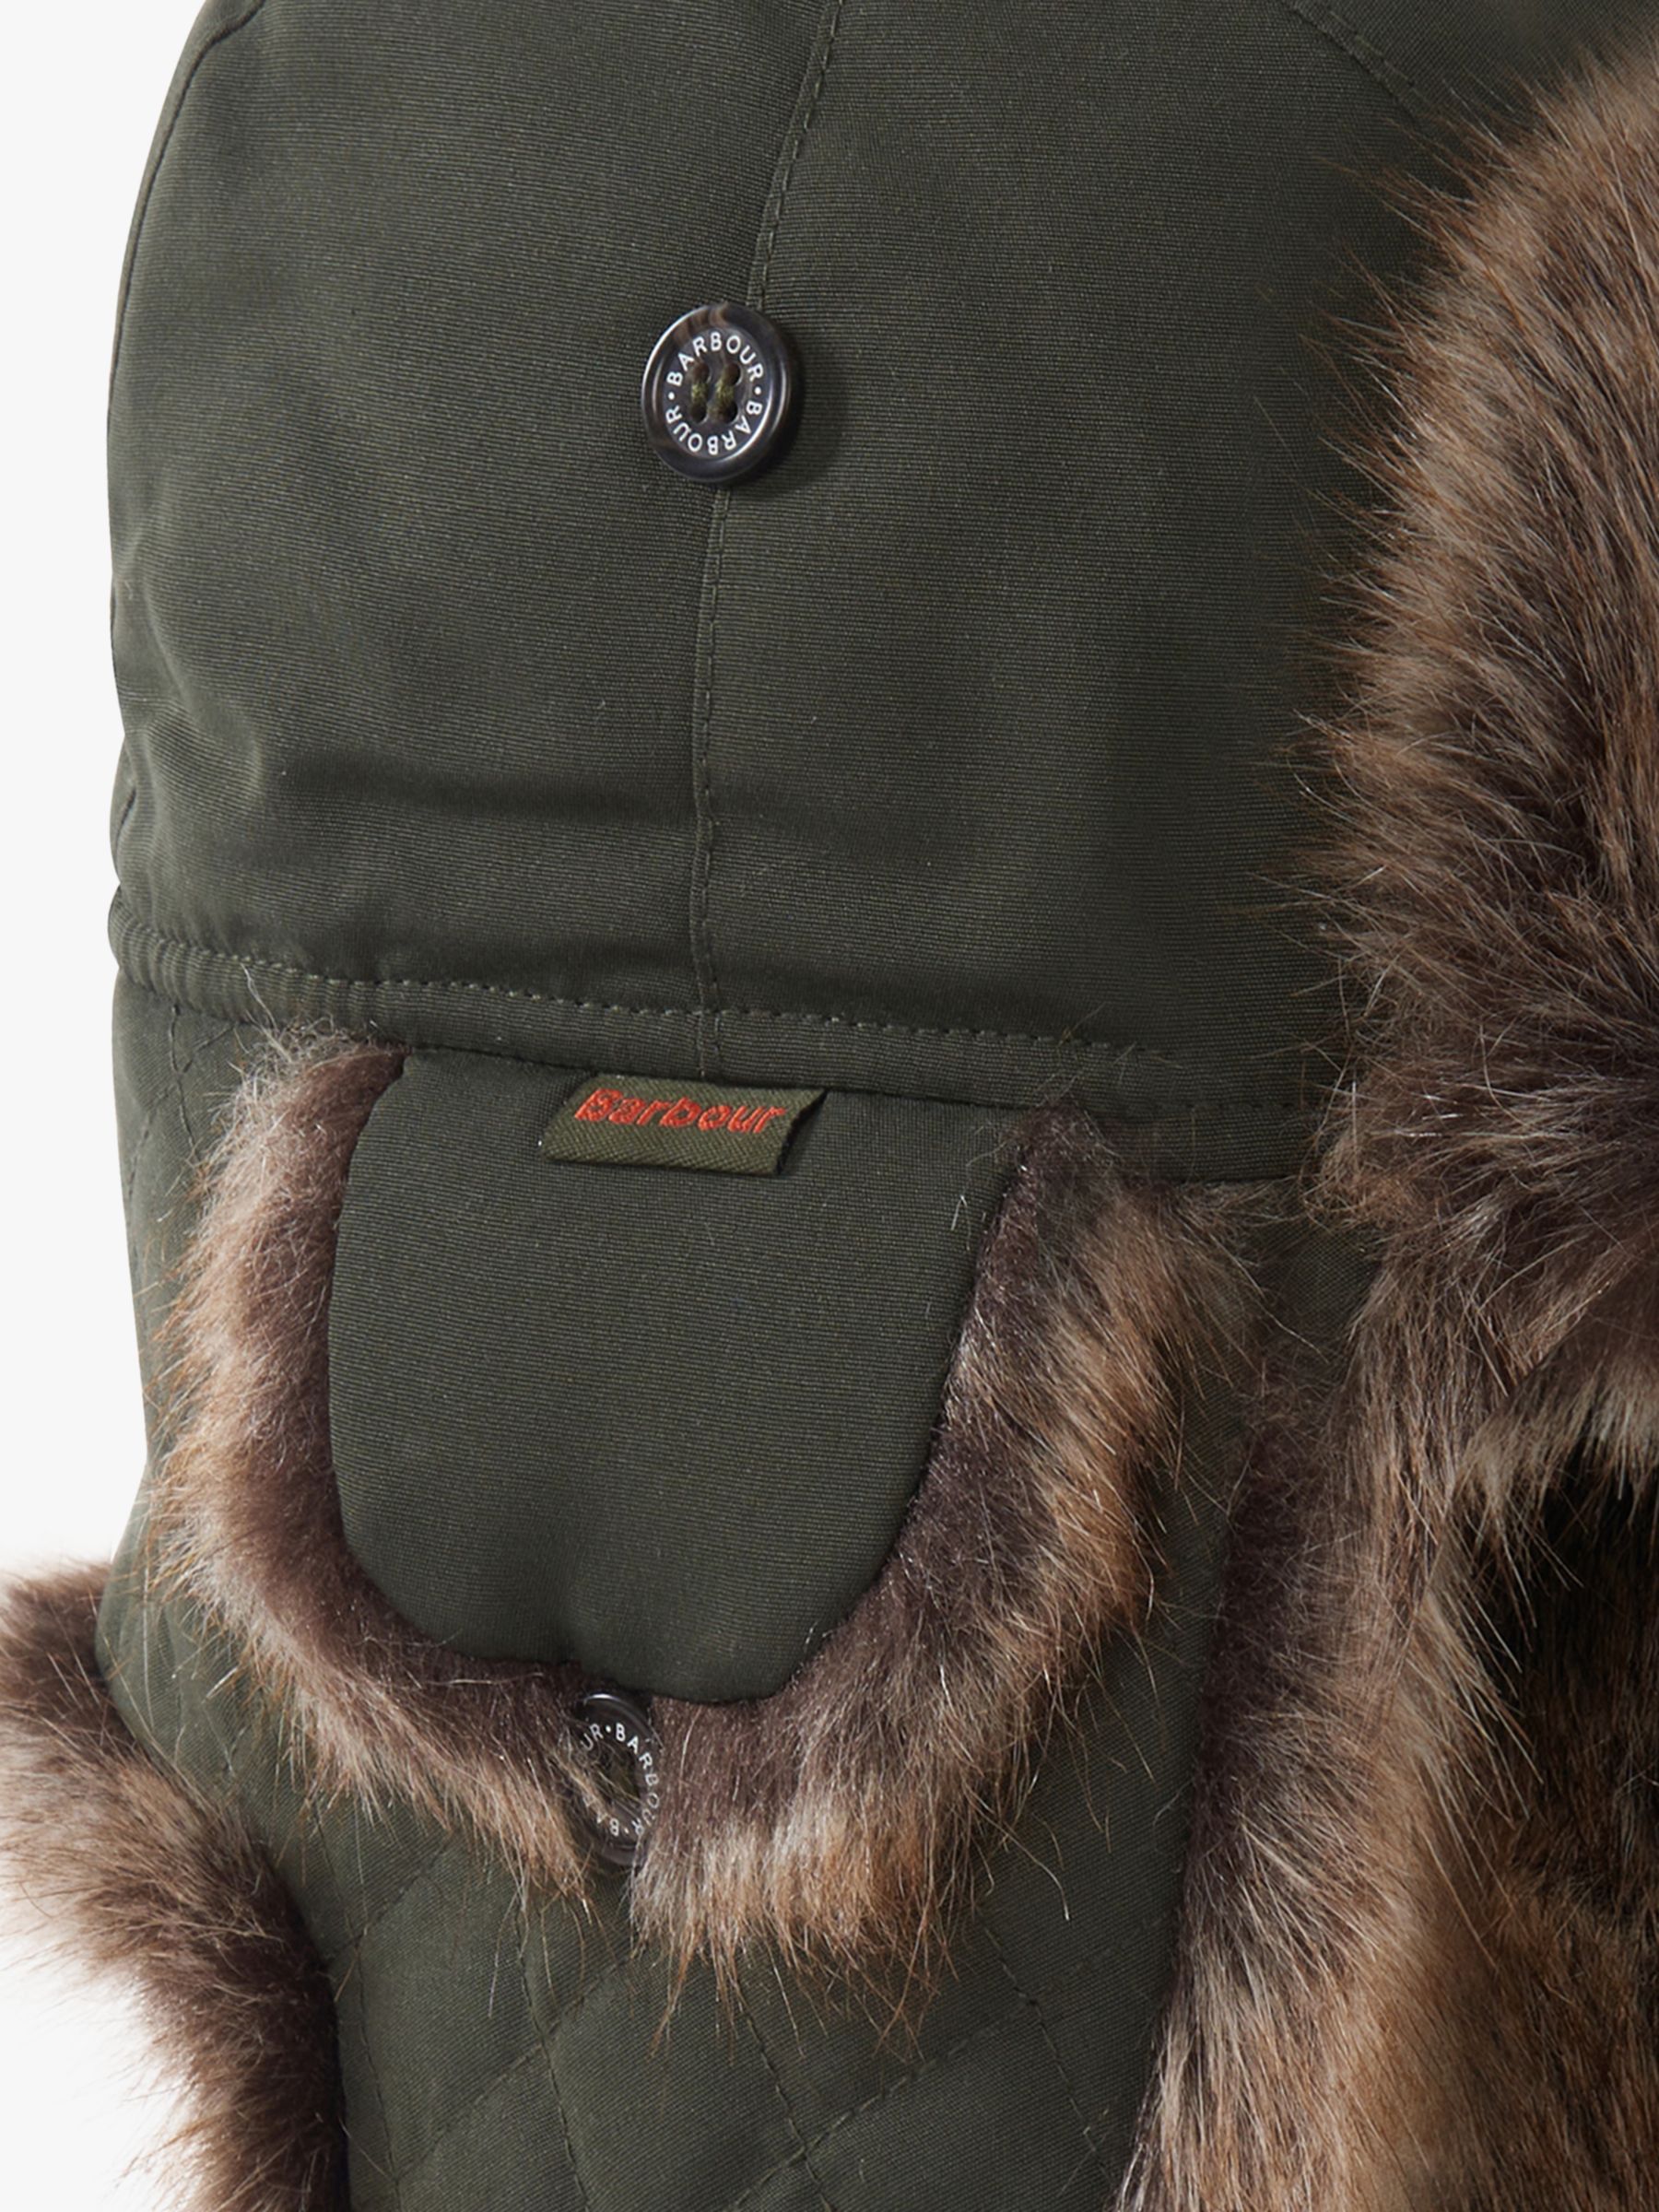 barbour wax trapper hat